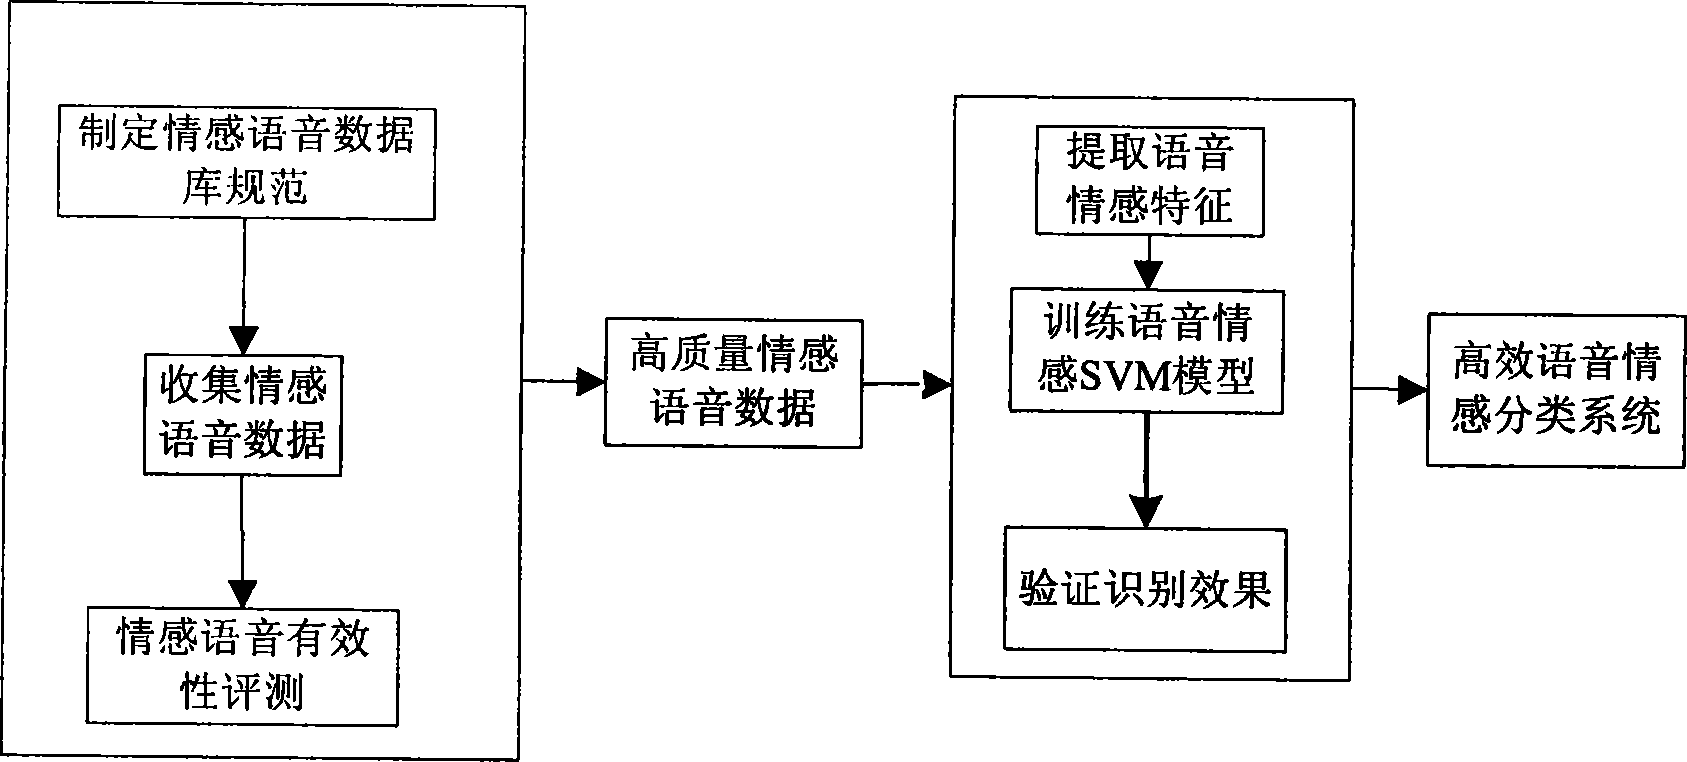 Extraction and modeling method for Chinese speech sensibility information